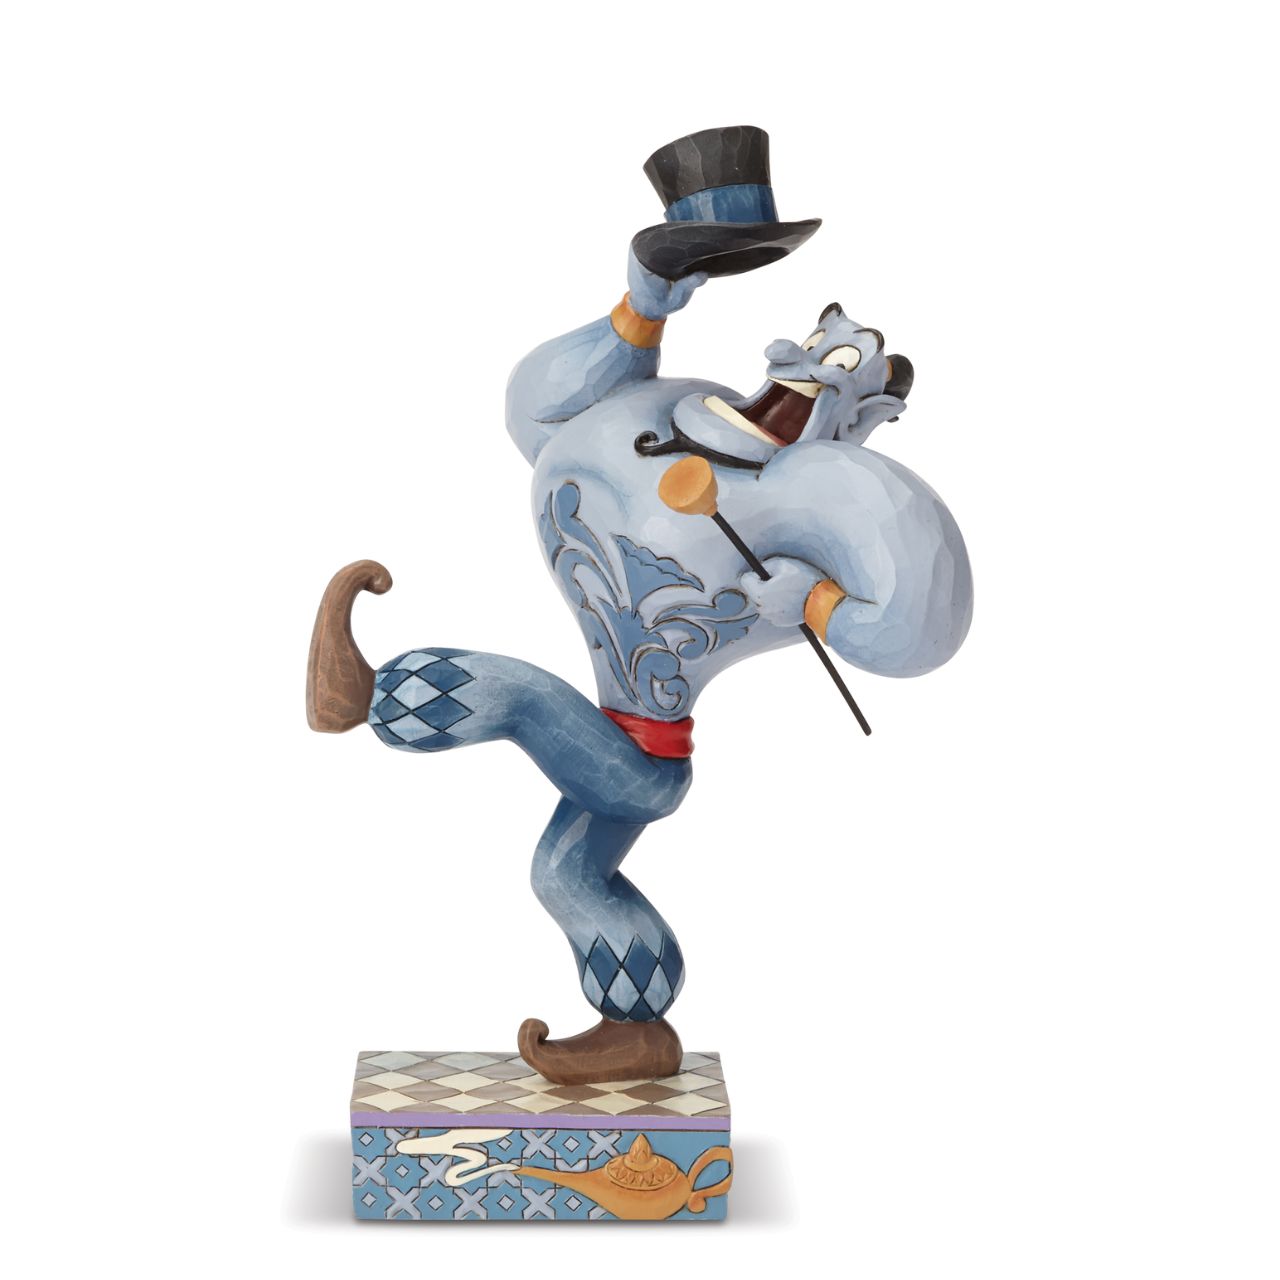 Disney's Aladdin Born Showman Genie Figurine by Jim Shore  You ain't never had a friend like Genie. Jim Shore captures his fun, comical spirit, as he dances along with a cane and top hat, entertaining his adoring audience. Make your wishes come true with this playful Genie from Disney's Aladdin in your magical collection.